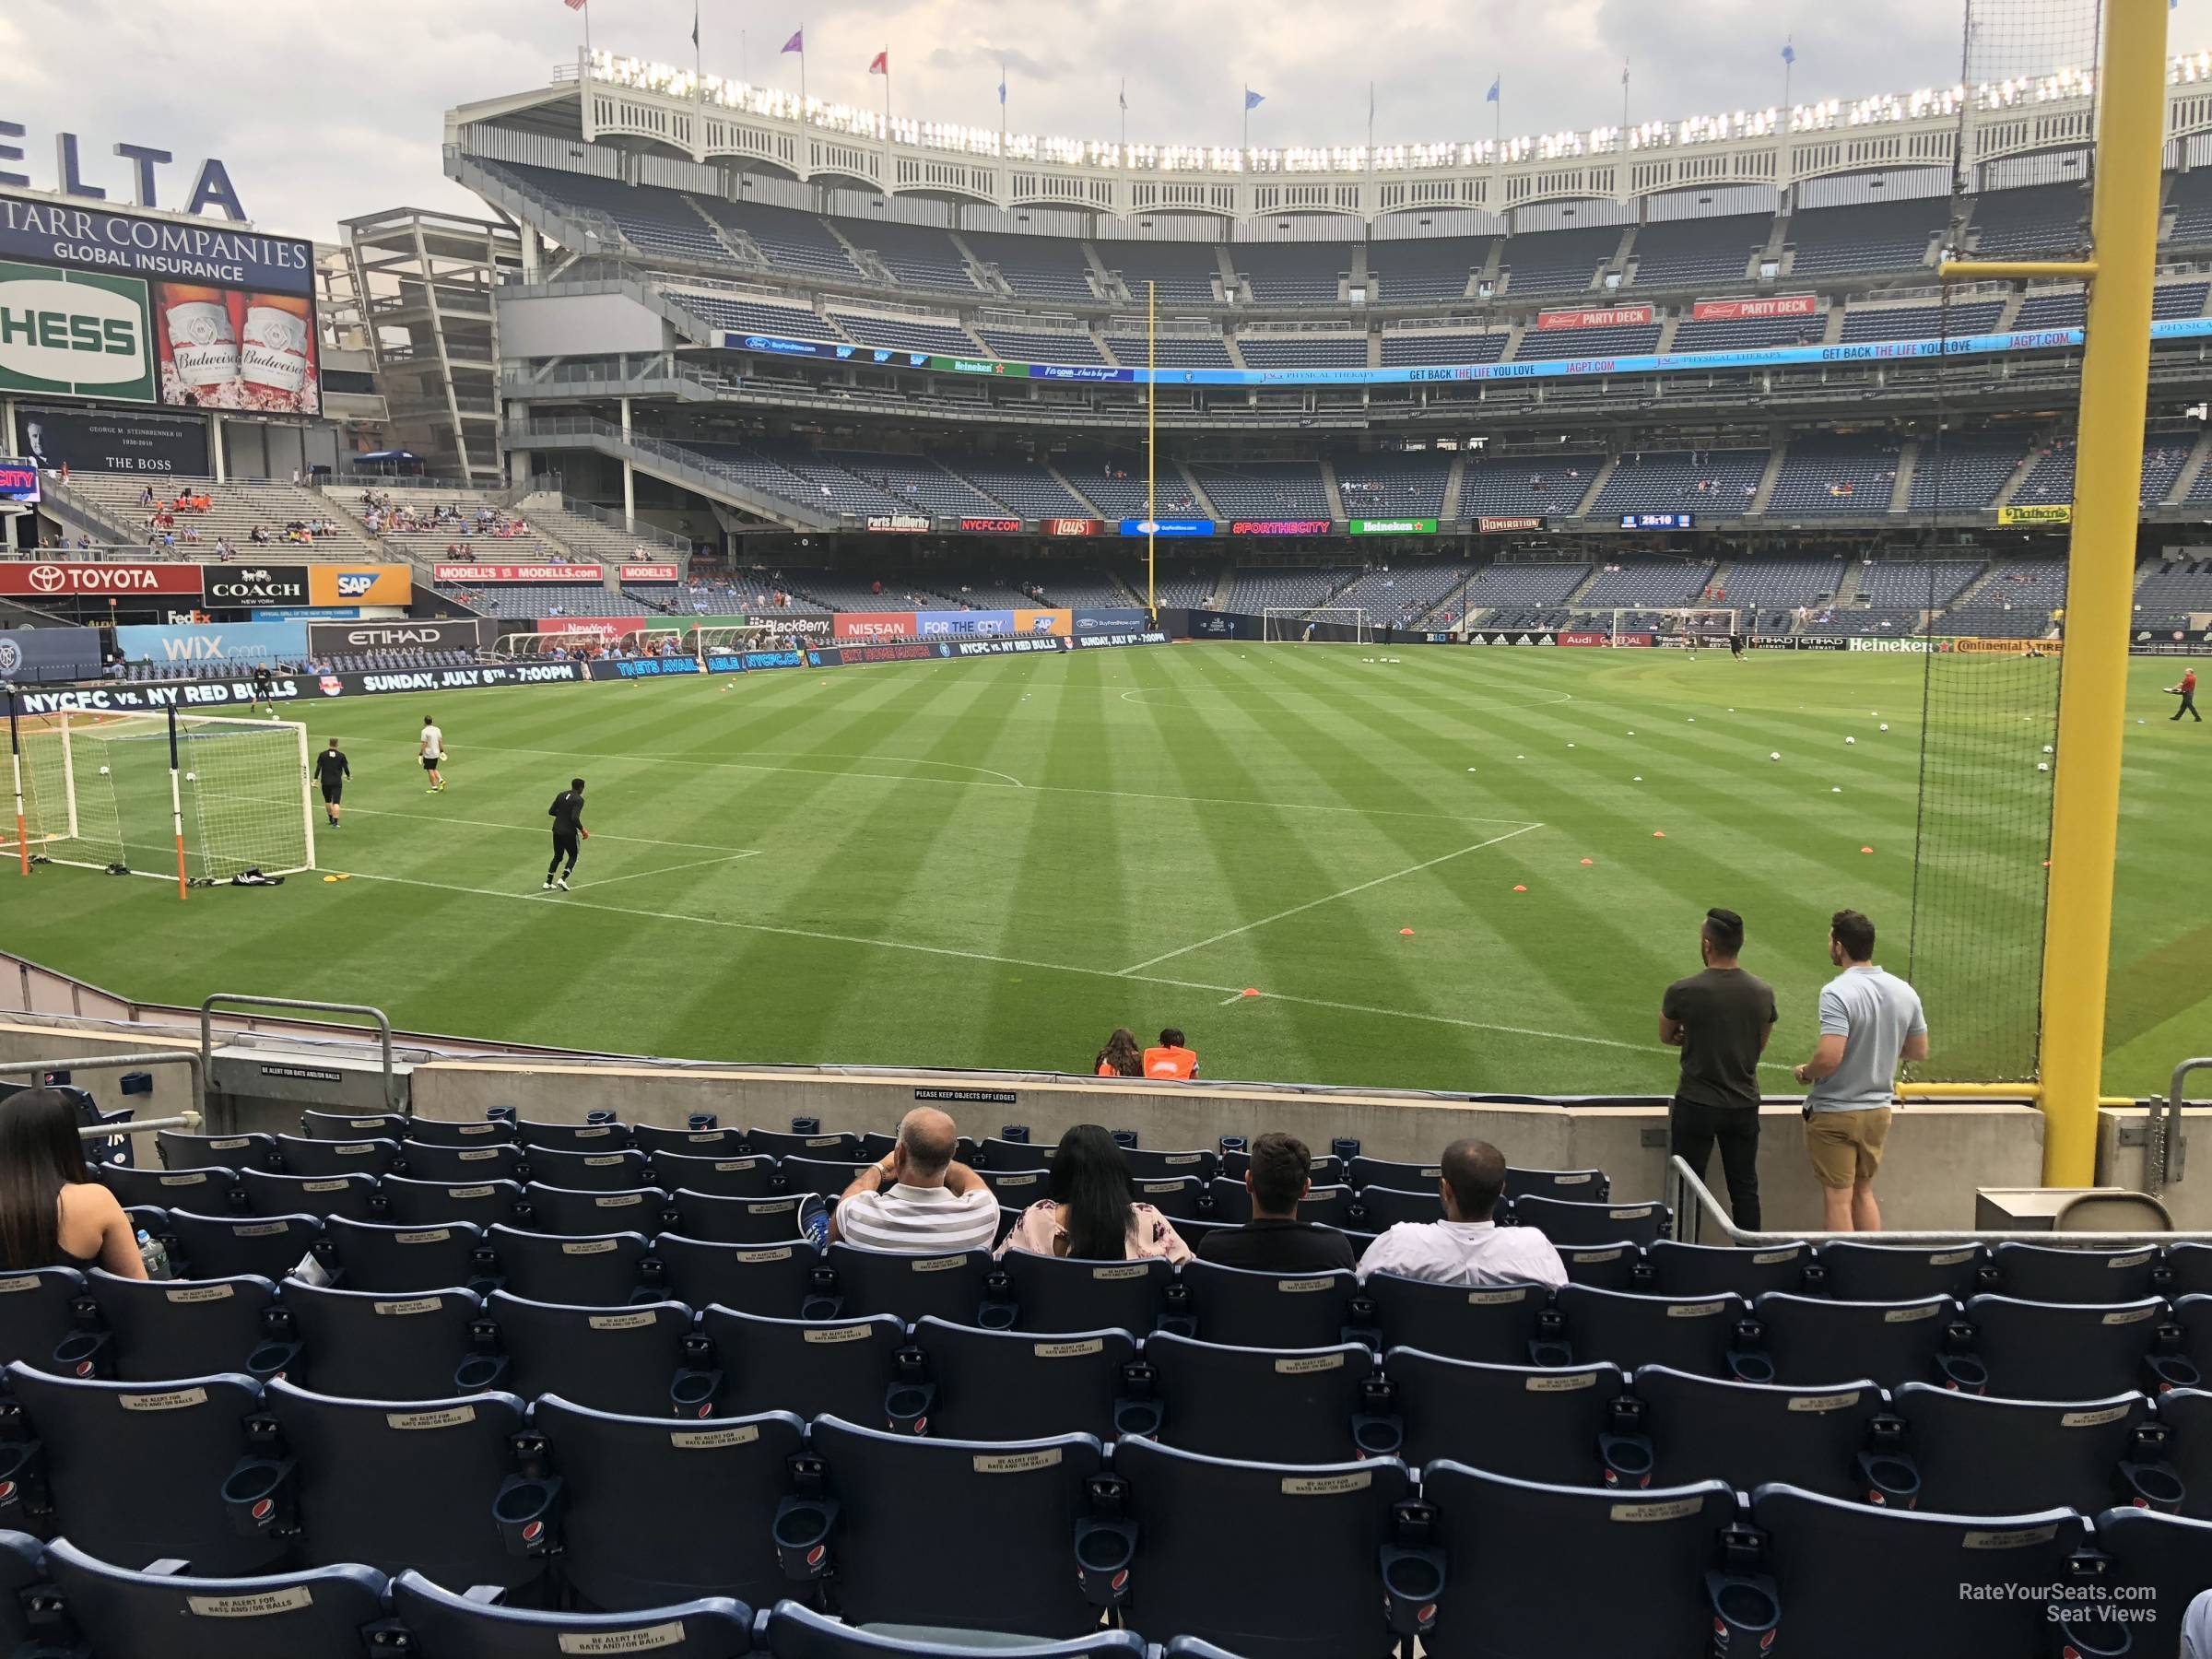 section 132, row 10 seat view  for soccer - yankee stadium